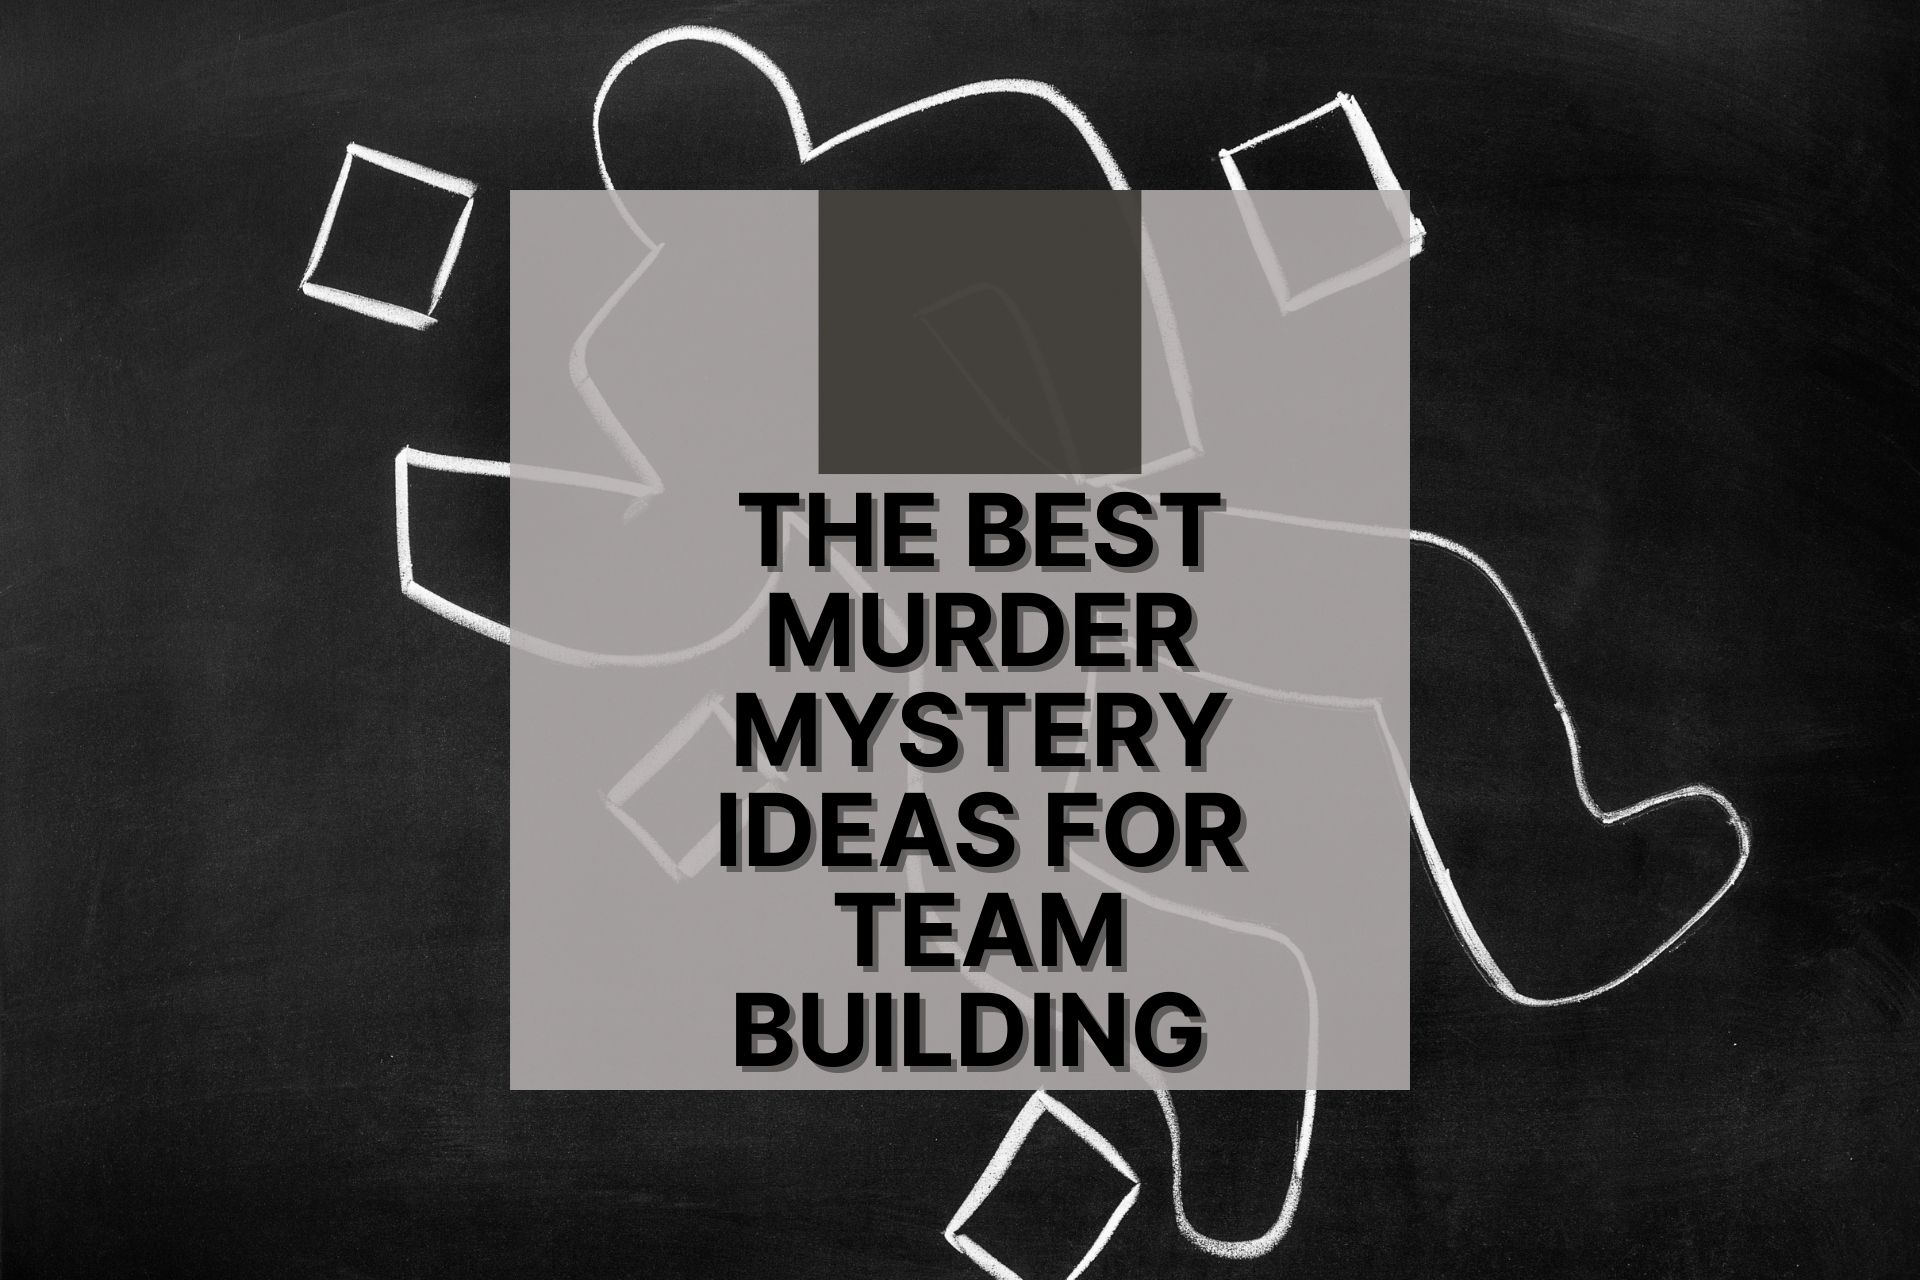 The Best Murder Mystery Ideas For Team Building